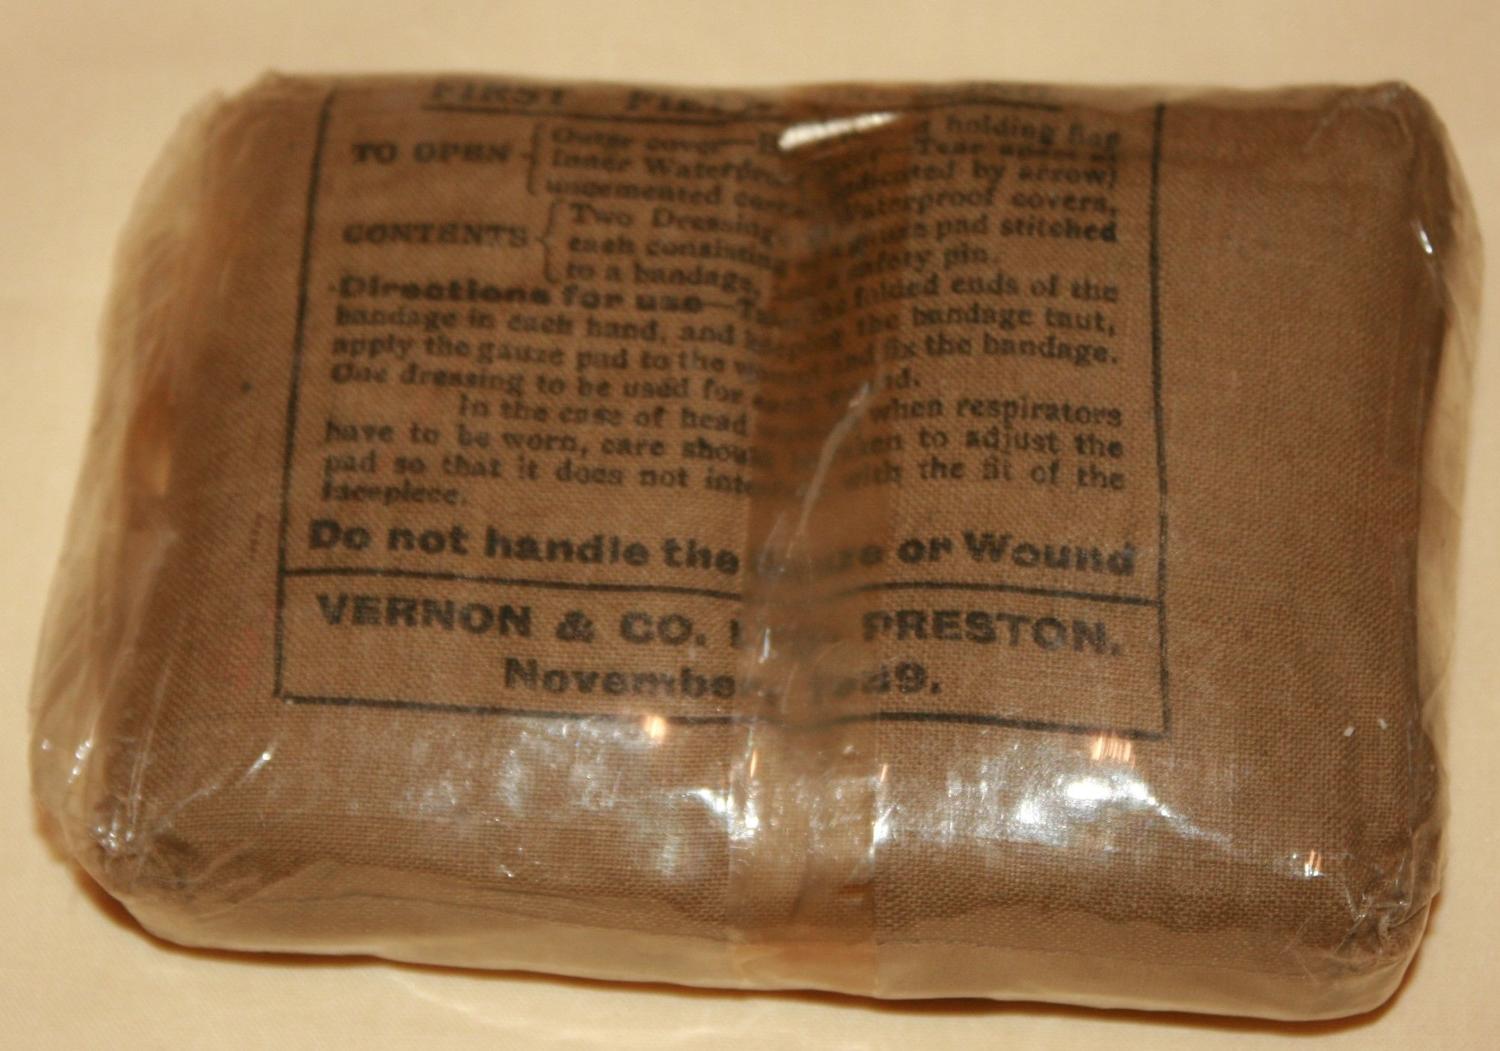 A 1939 DATED 1ST FILED DRESSING IN ITS CELLOPHANE WRAPPER